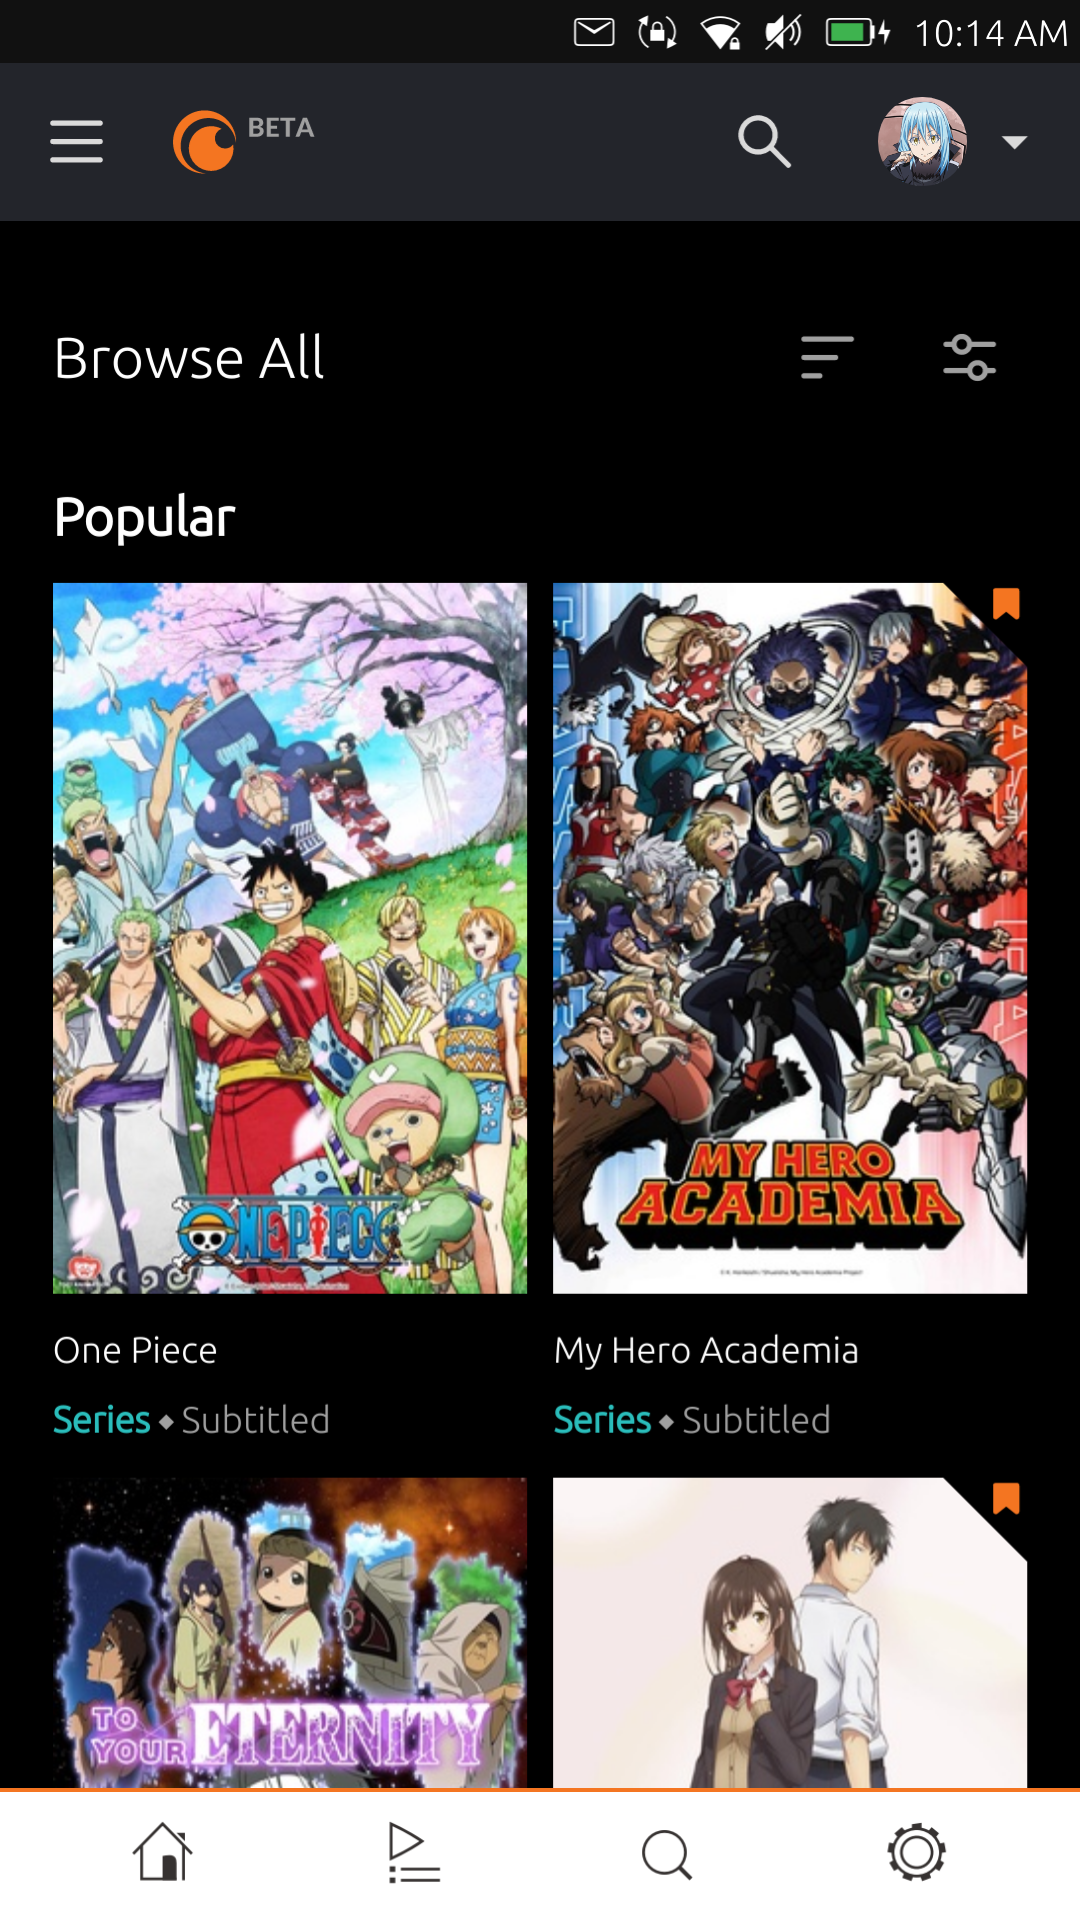 Crunchyroll::Appstore for Android